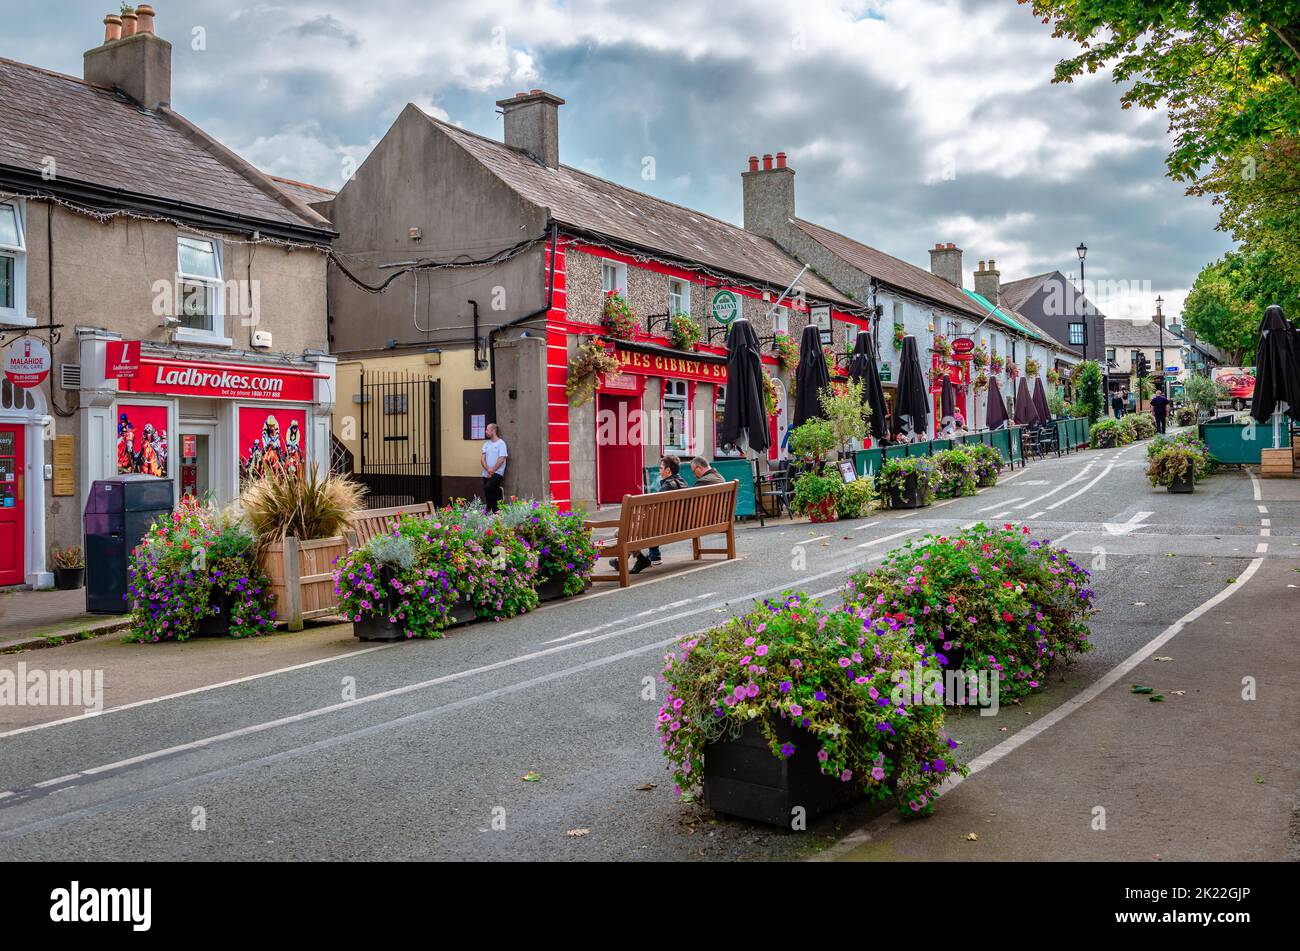 View of New Street in the center of the Malahide, Ireland, a newly pedestrianized area to accommodate outdoor dining. Stock Photo